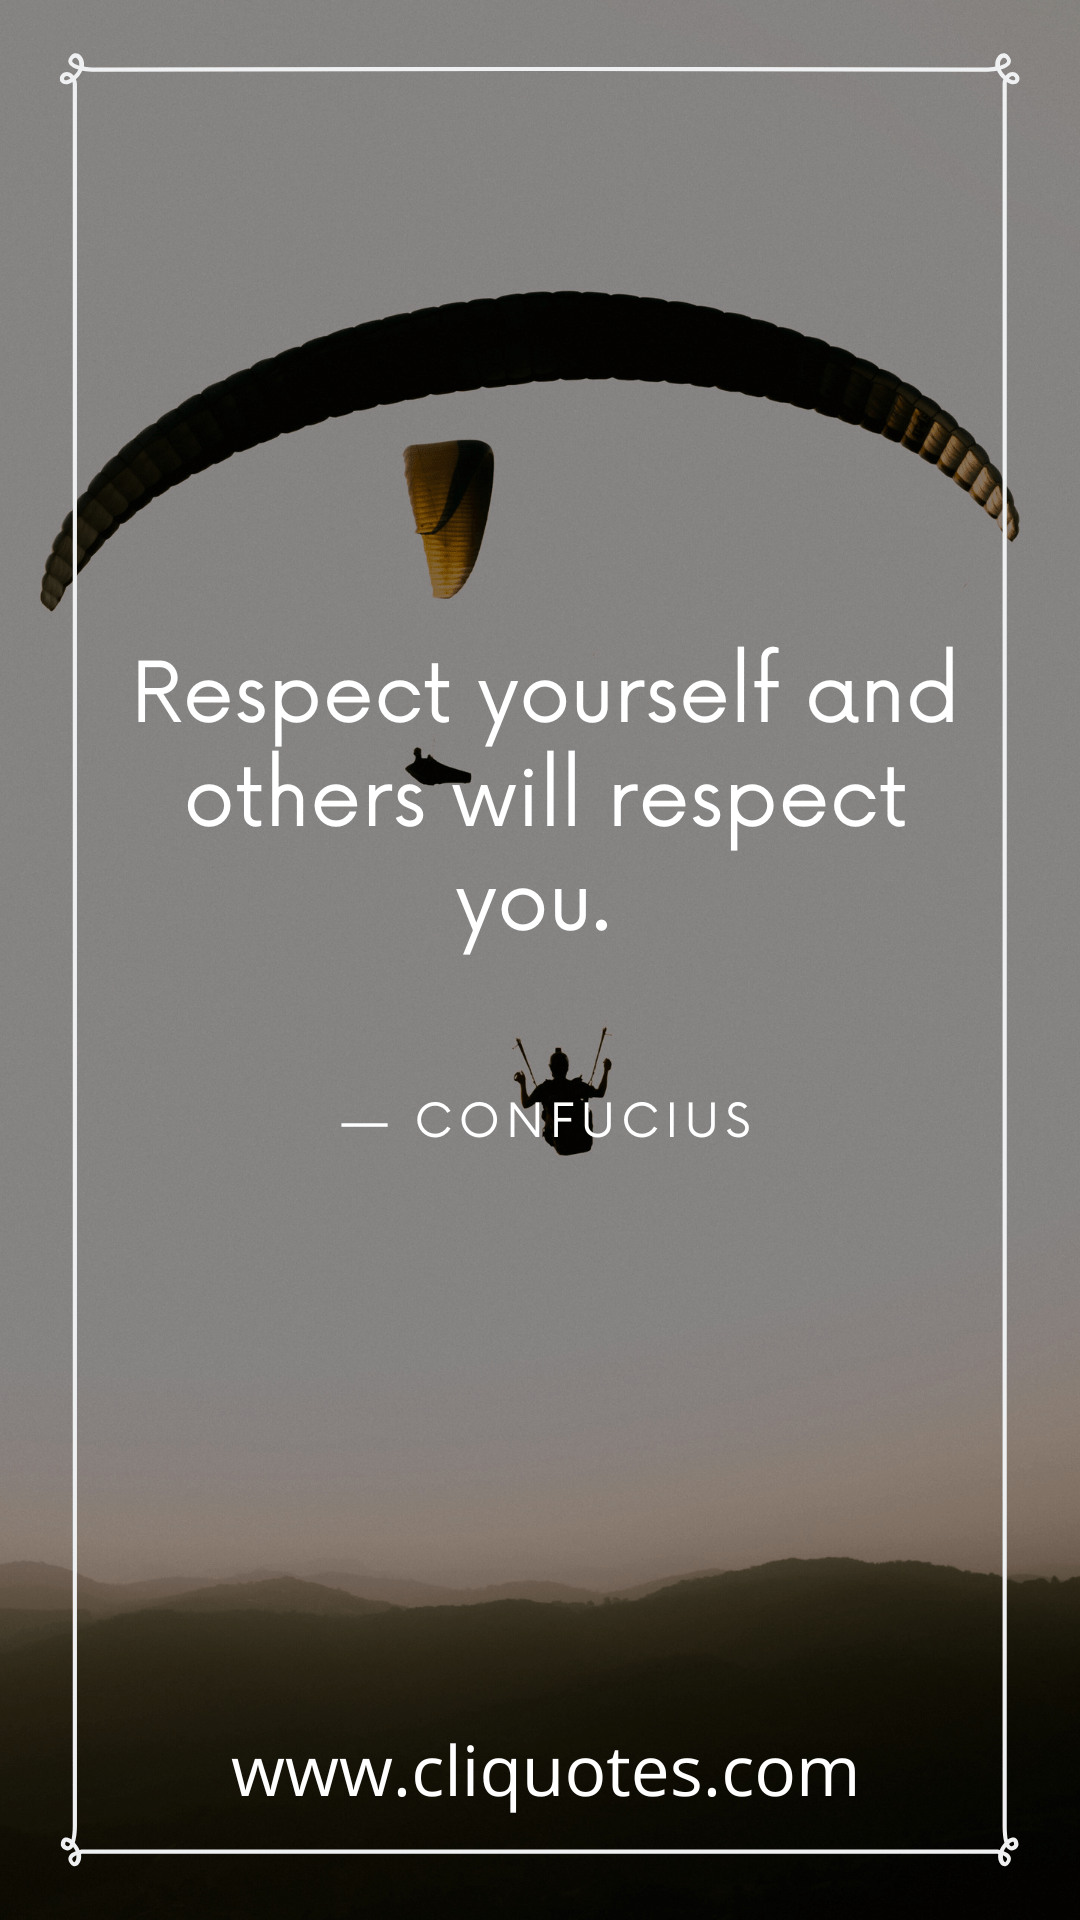 Respect yourself and others will respect you. — CONFUCIUS